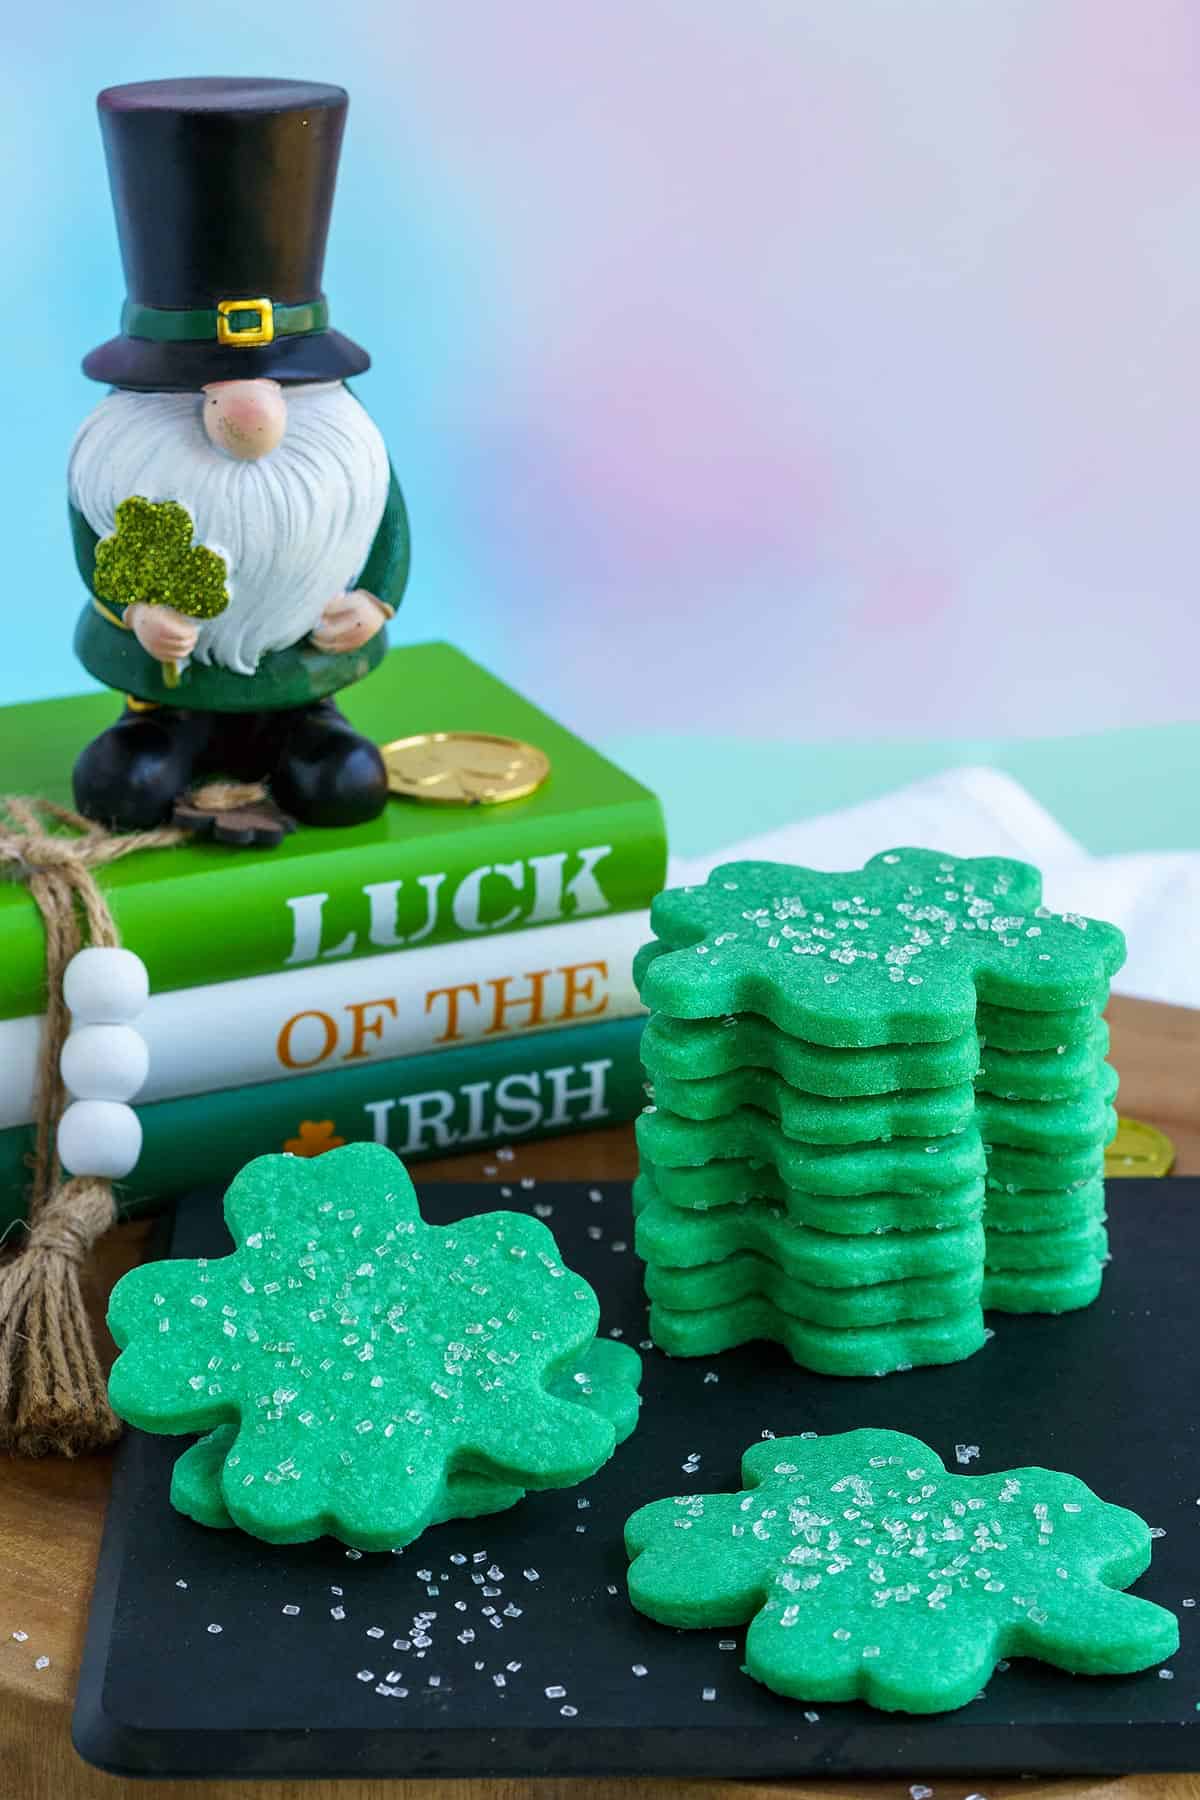 Irish Shamrock Sugar Cookies with a leprechaun standing on a stack of books.